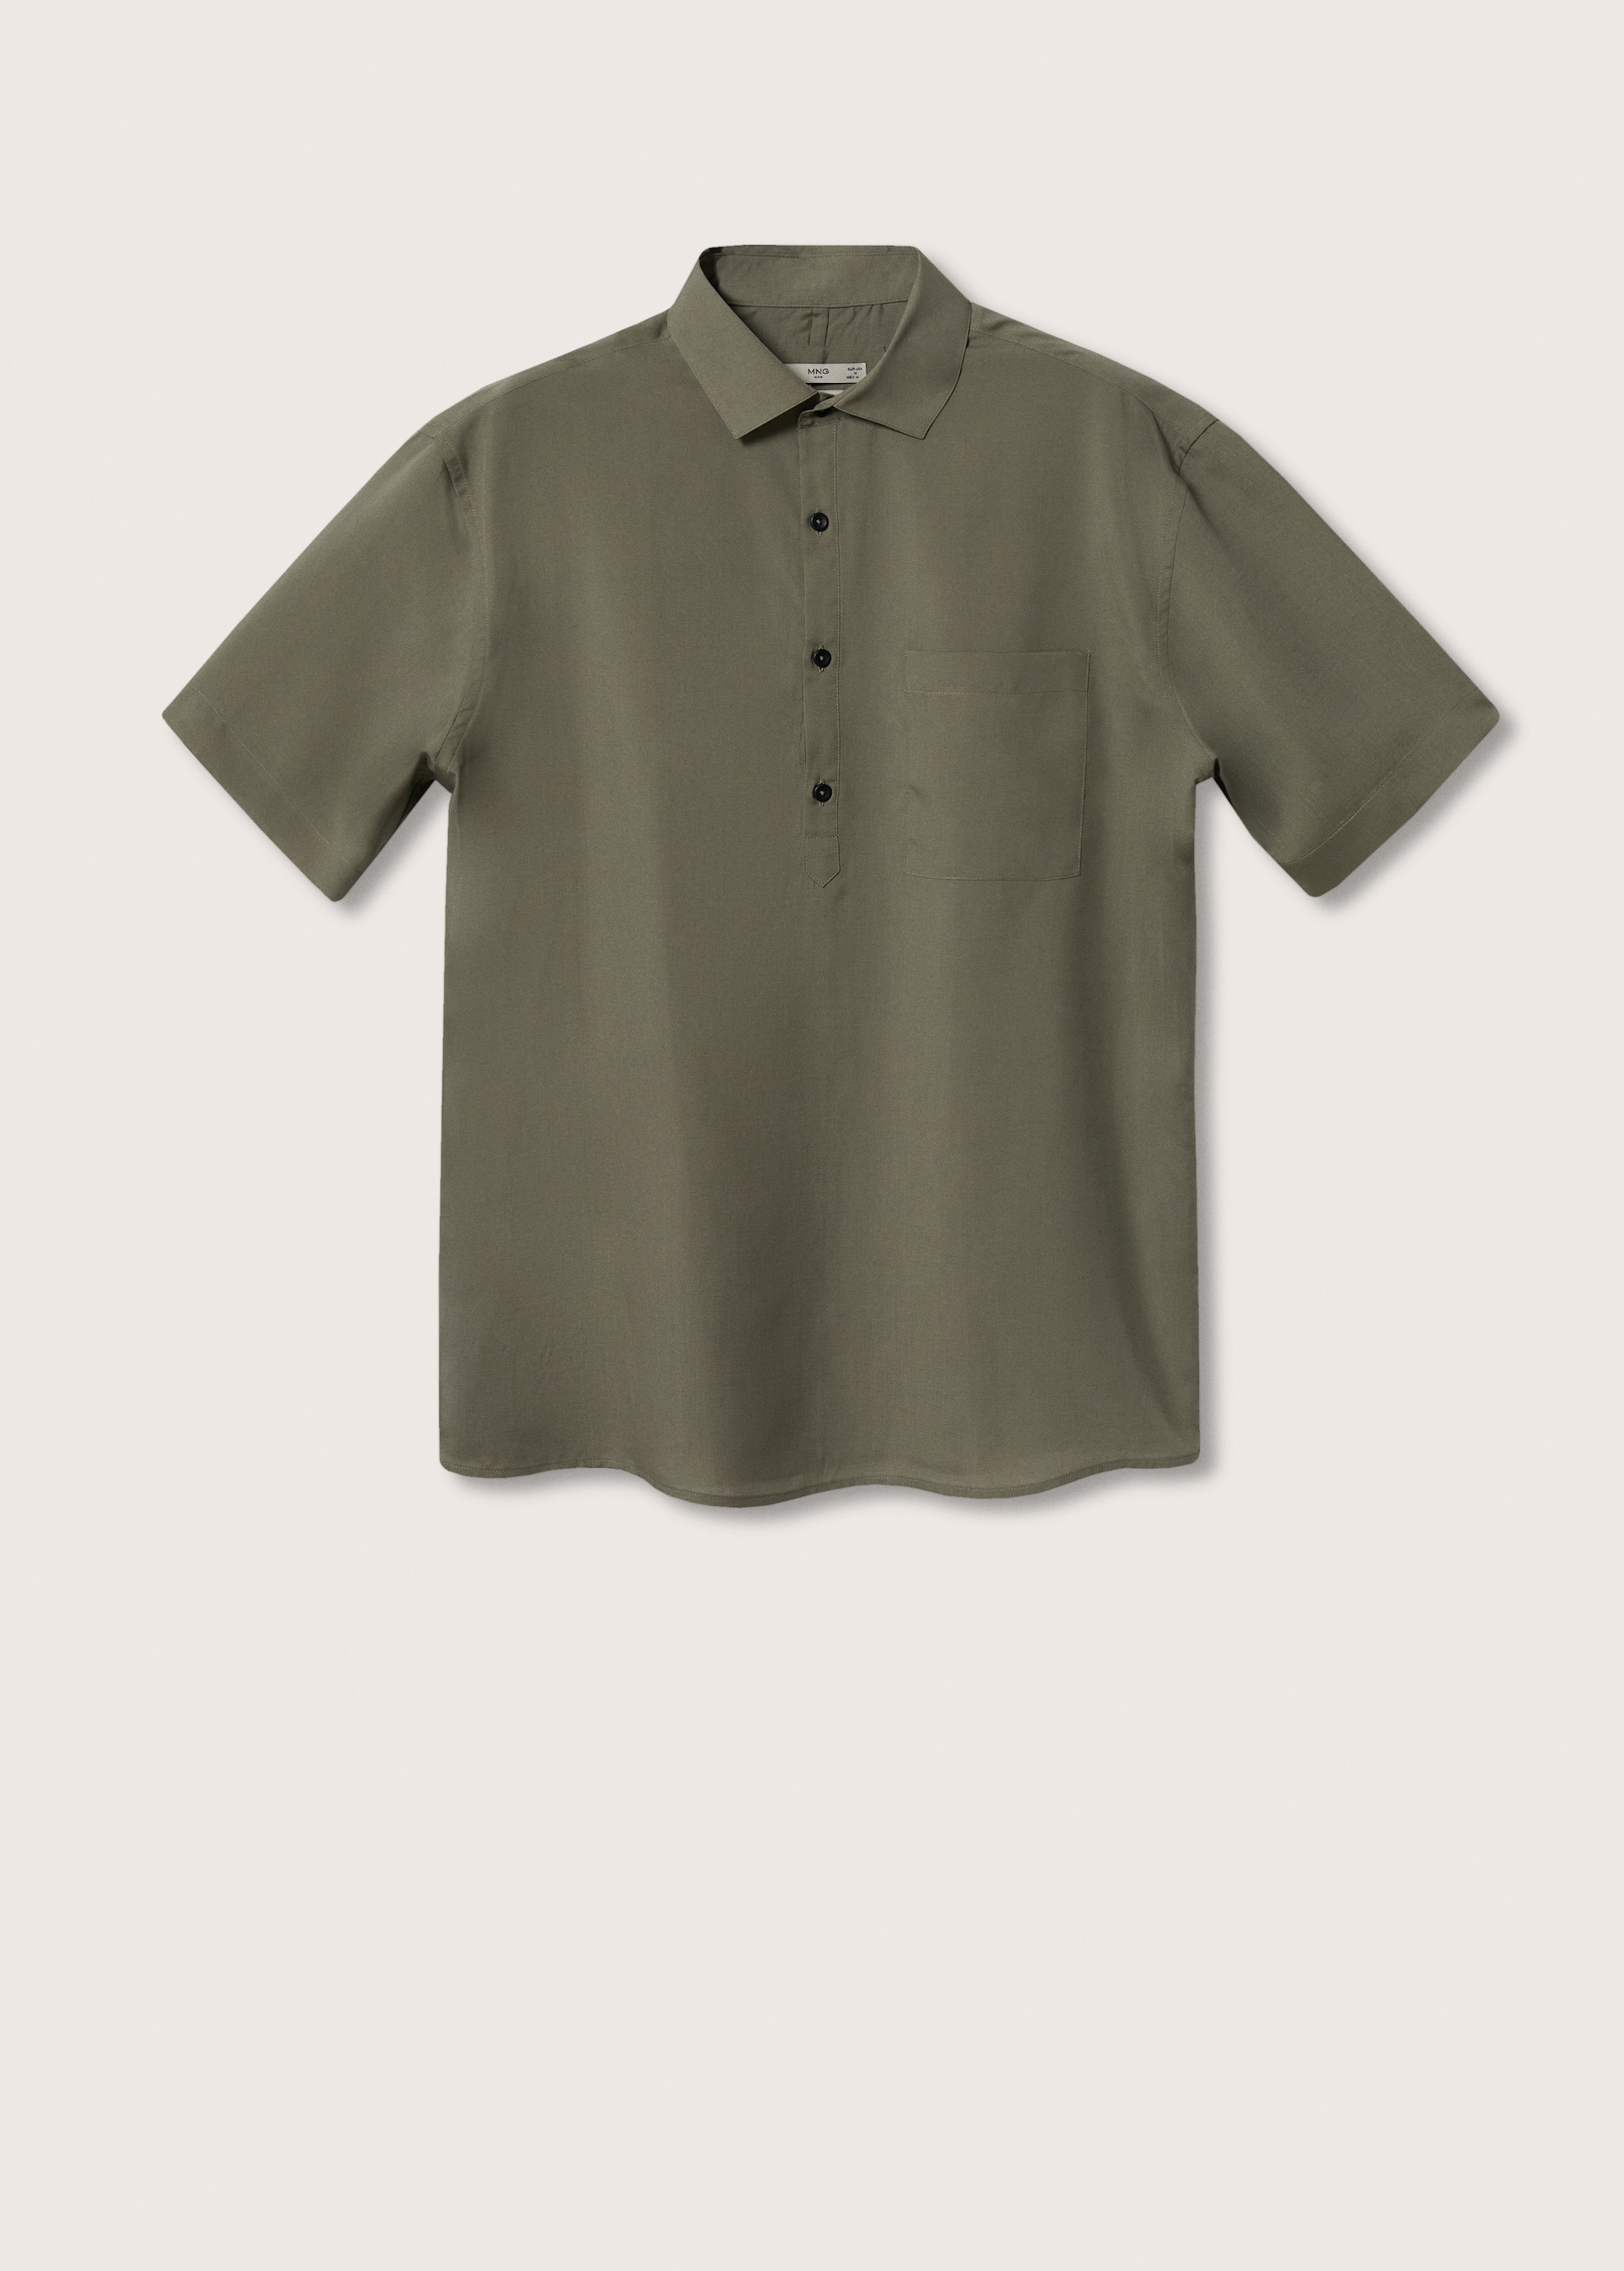 Slim-fit lyocell linen shirt - Article without model